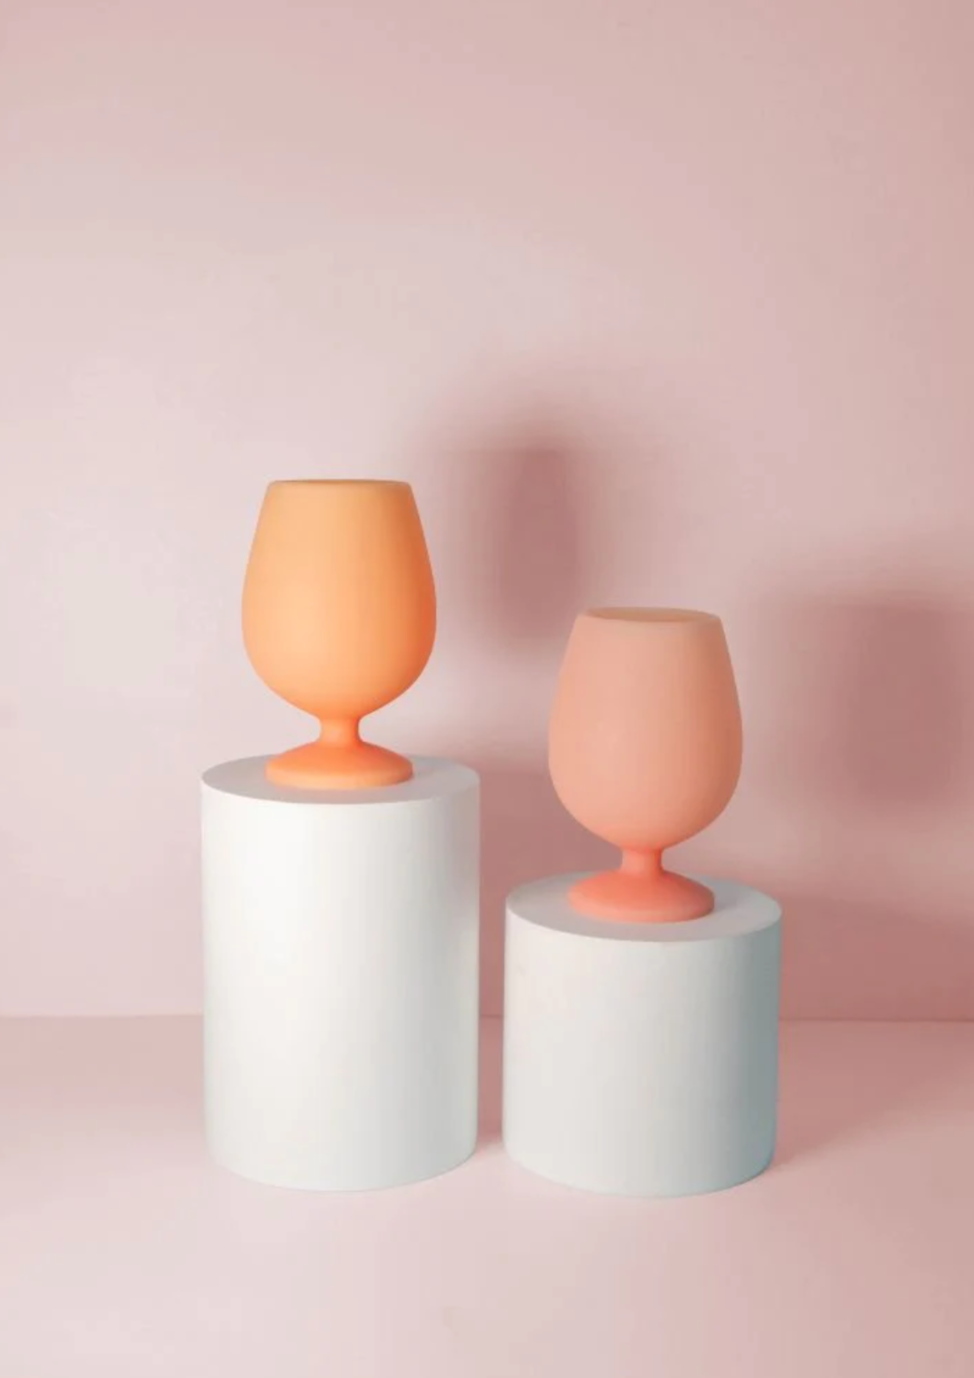 Peach + Petal | Stemm | Silicone Unbreakable Wine Glasses, by Porter Green Discover the famous stemm unbreakable wine glasses by Porter Green, the world leaders in silicone drinkware.  stemm | stylish + travelling + ethical + minimalist + motile   Made from fda approved food grade silicone, lightweight, portable, and commercial dishwasher safe, stemm are the perfect stemmed glasses for indoor/outdoor events and entertaining. 